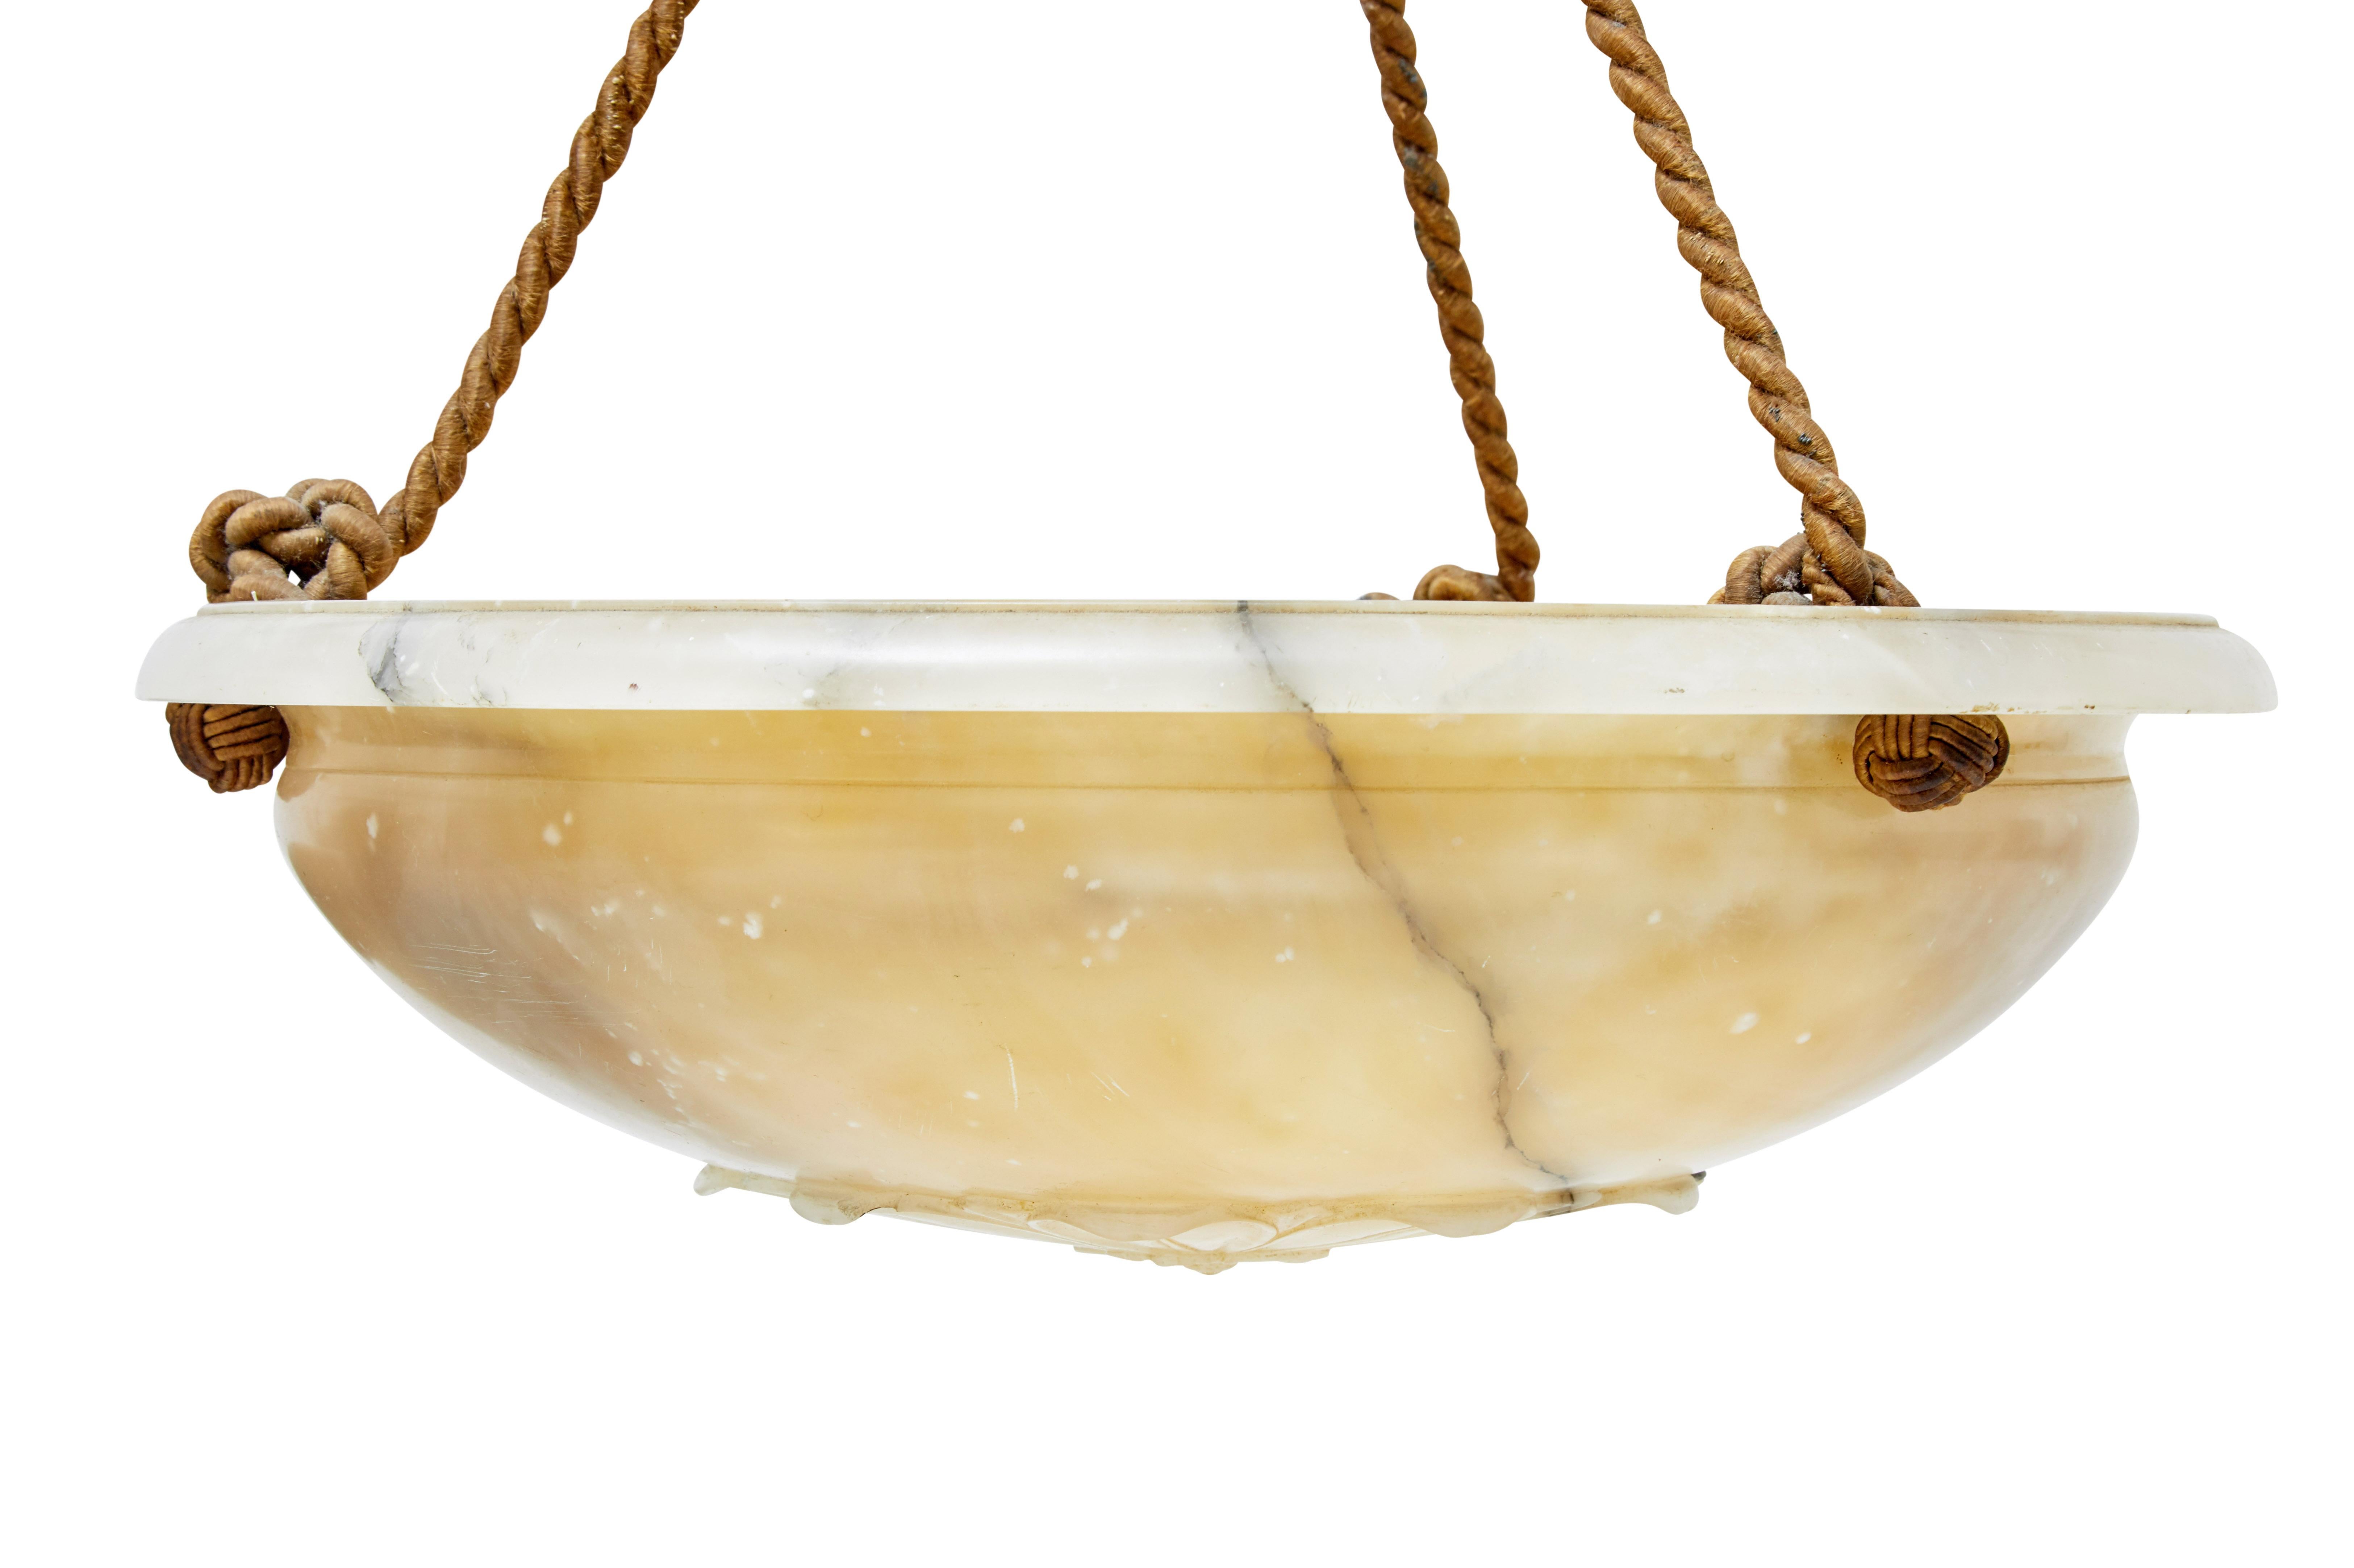 Good quality art deco alabaster chandelier, circa 1920.

Carved alabaster dish with flower design on the underside base. Dish is suspended by three ropes, leading up to tassles and matching alabaster ceiling rose.

Fitted with three bulb